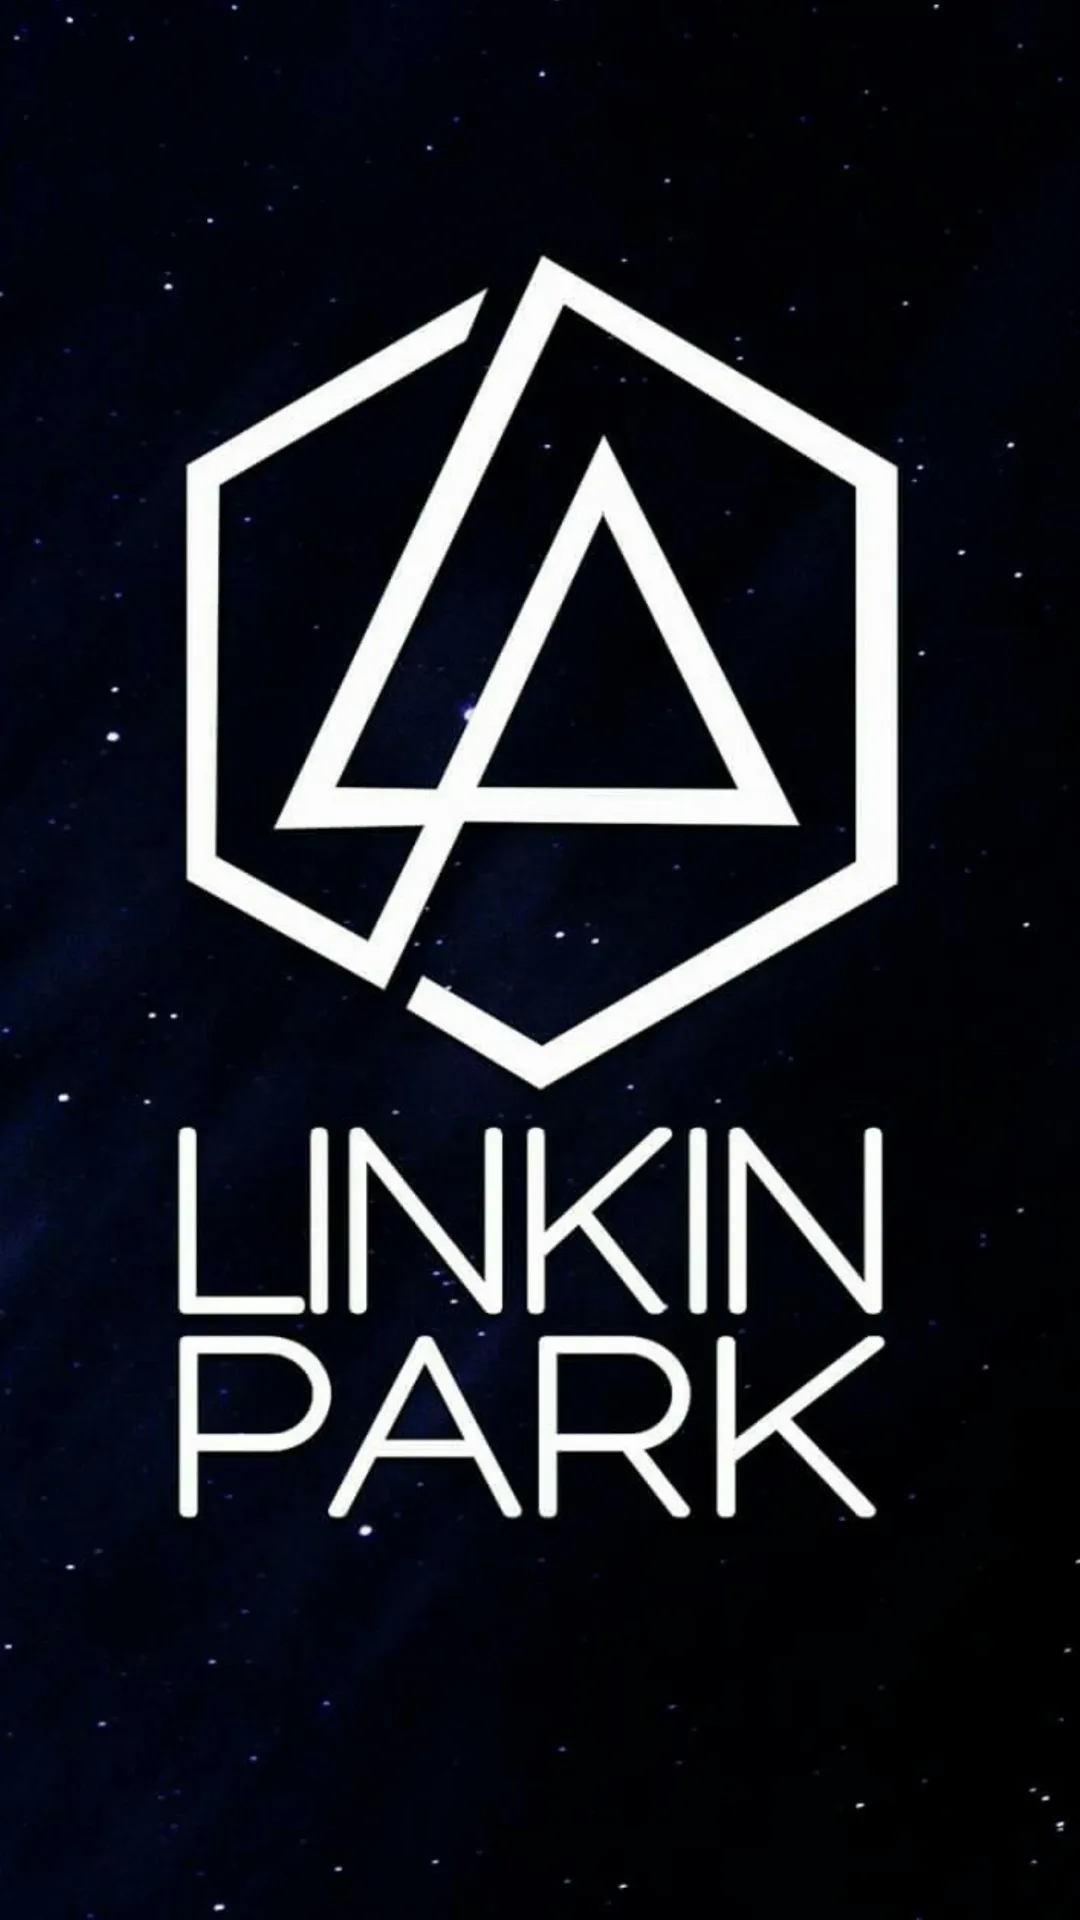 Linkin park a place for my